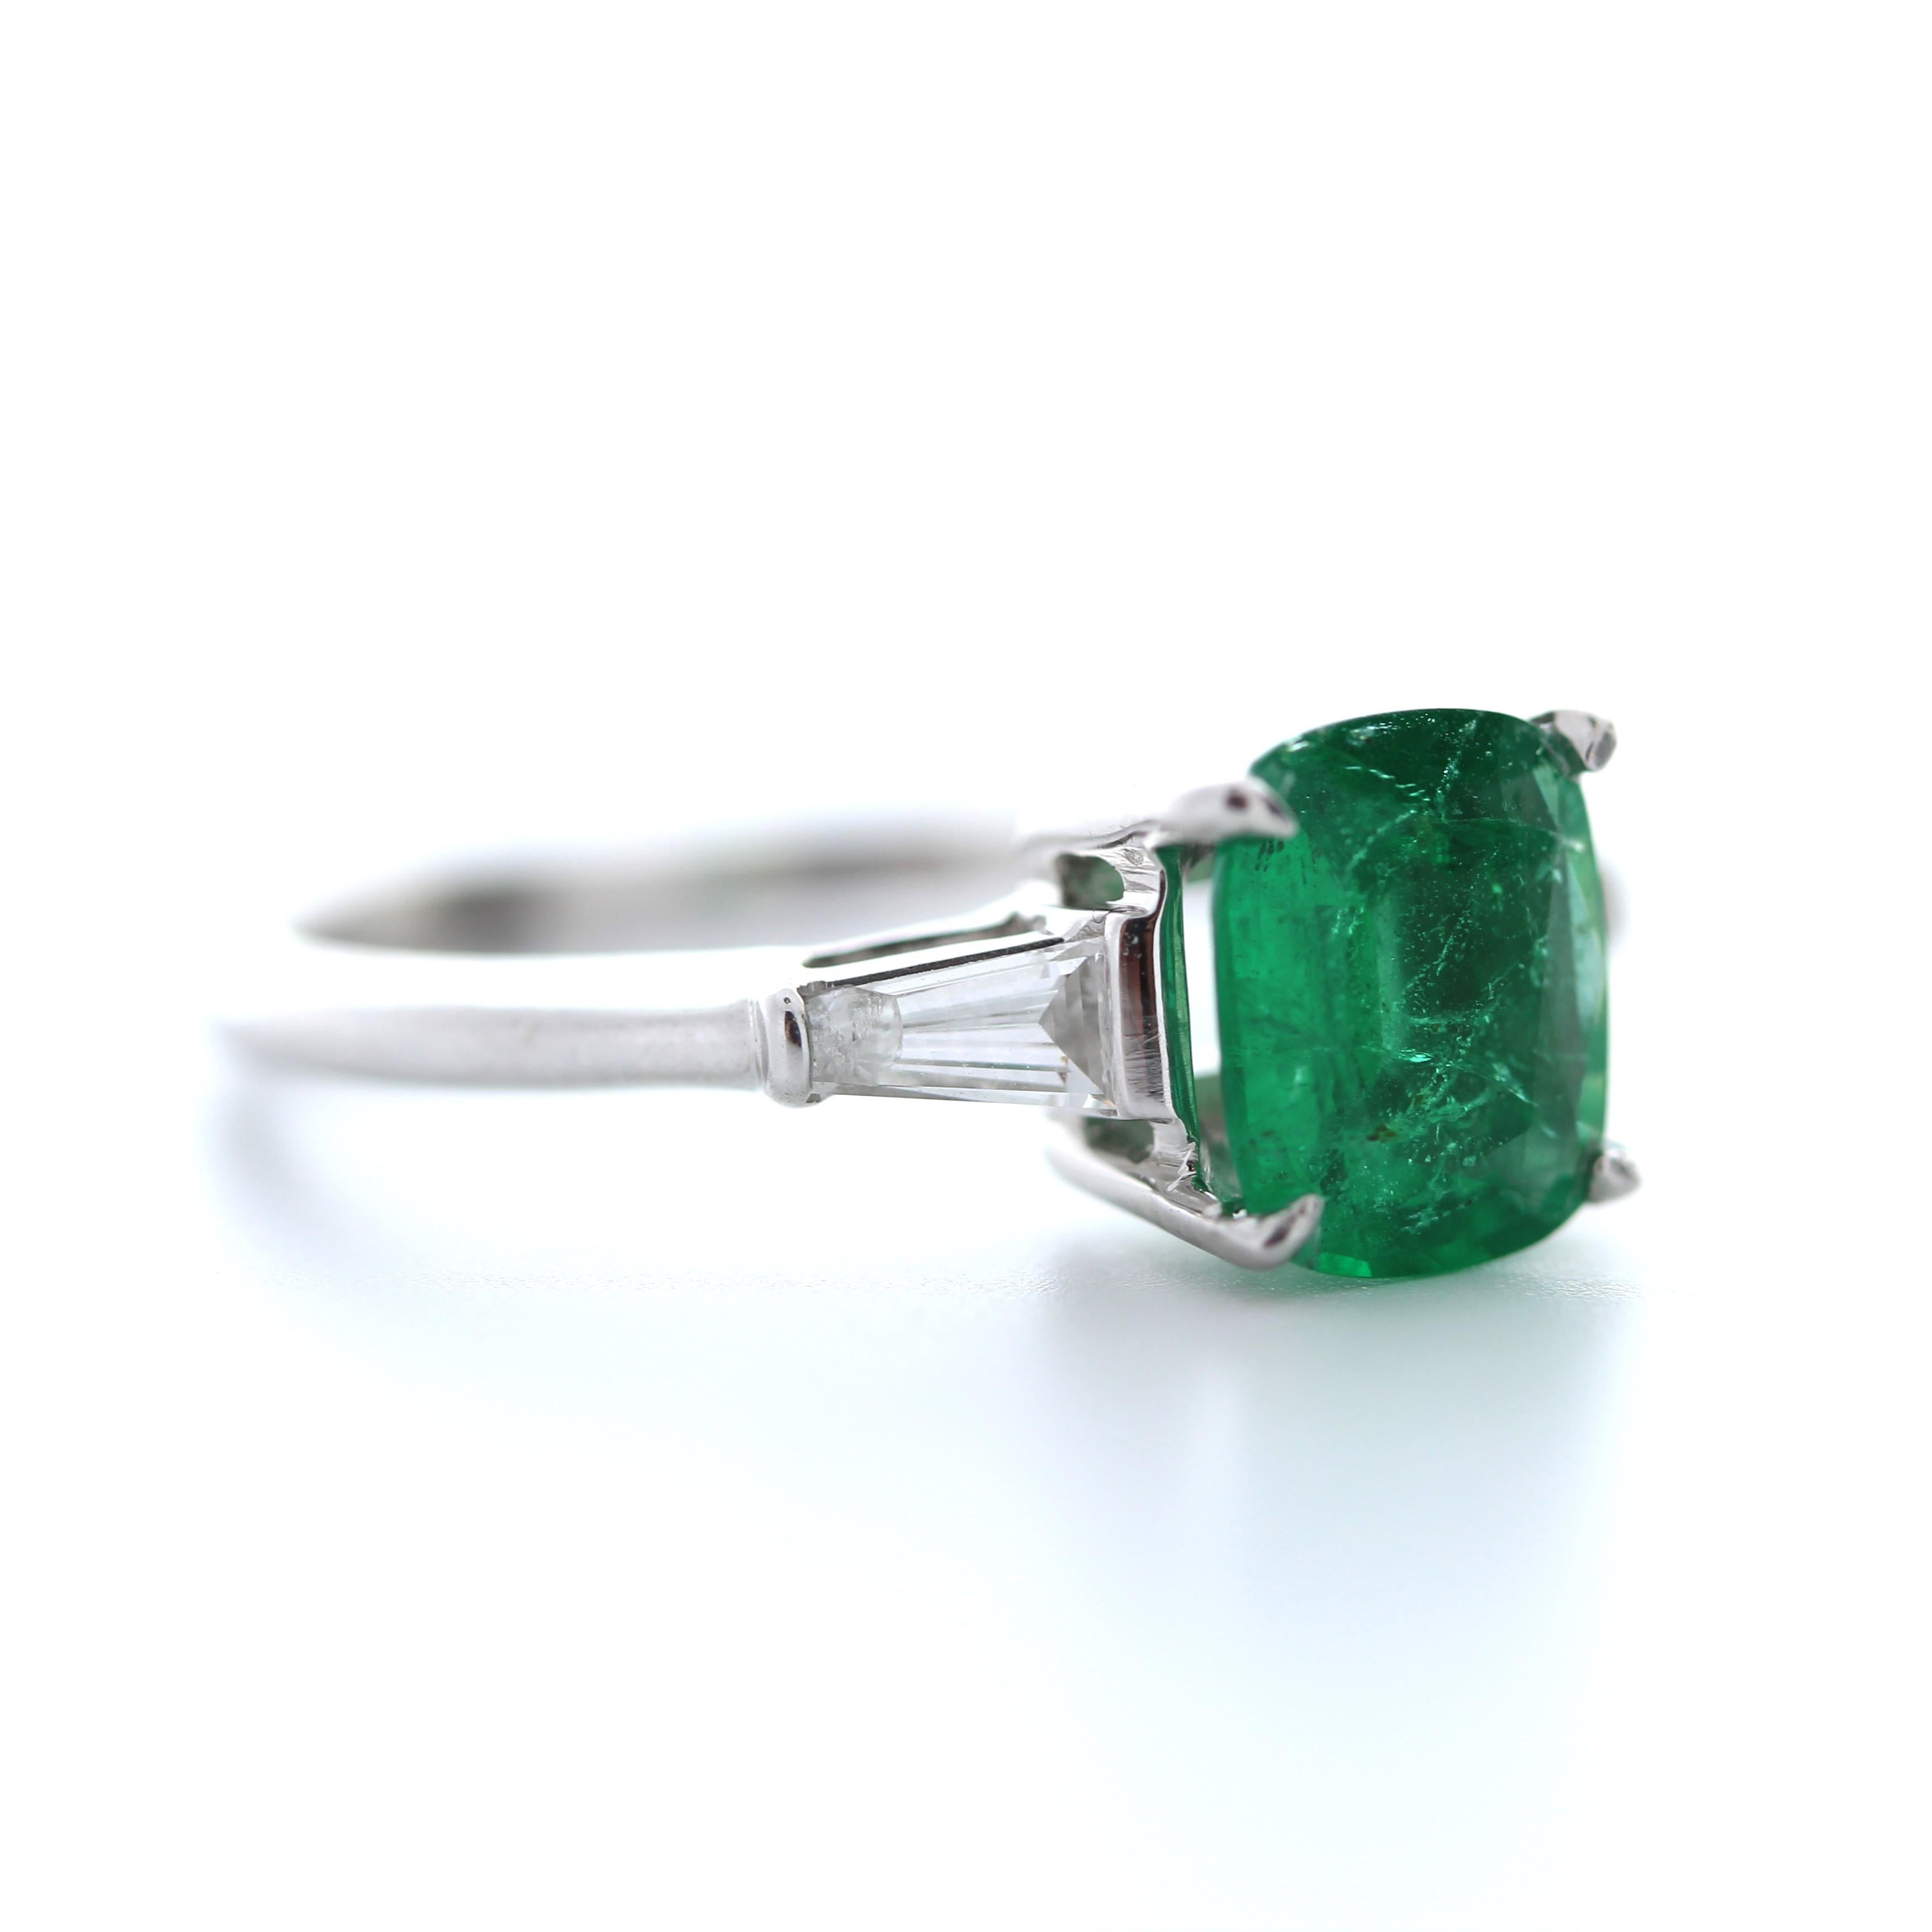 Would you look at this beauty! Simple in design, but there is nothing ordinary about the gorgeous color of this breathtaking green emerald ring. This stunning piece features a emerald cut 1.22 carats emerald, set into a four-prong. It is accompanied